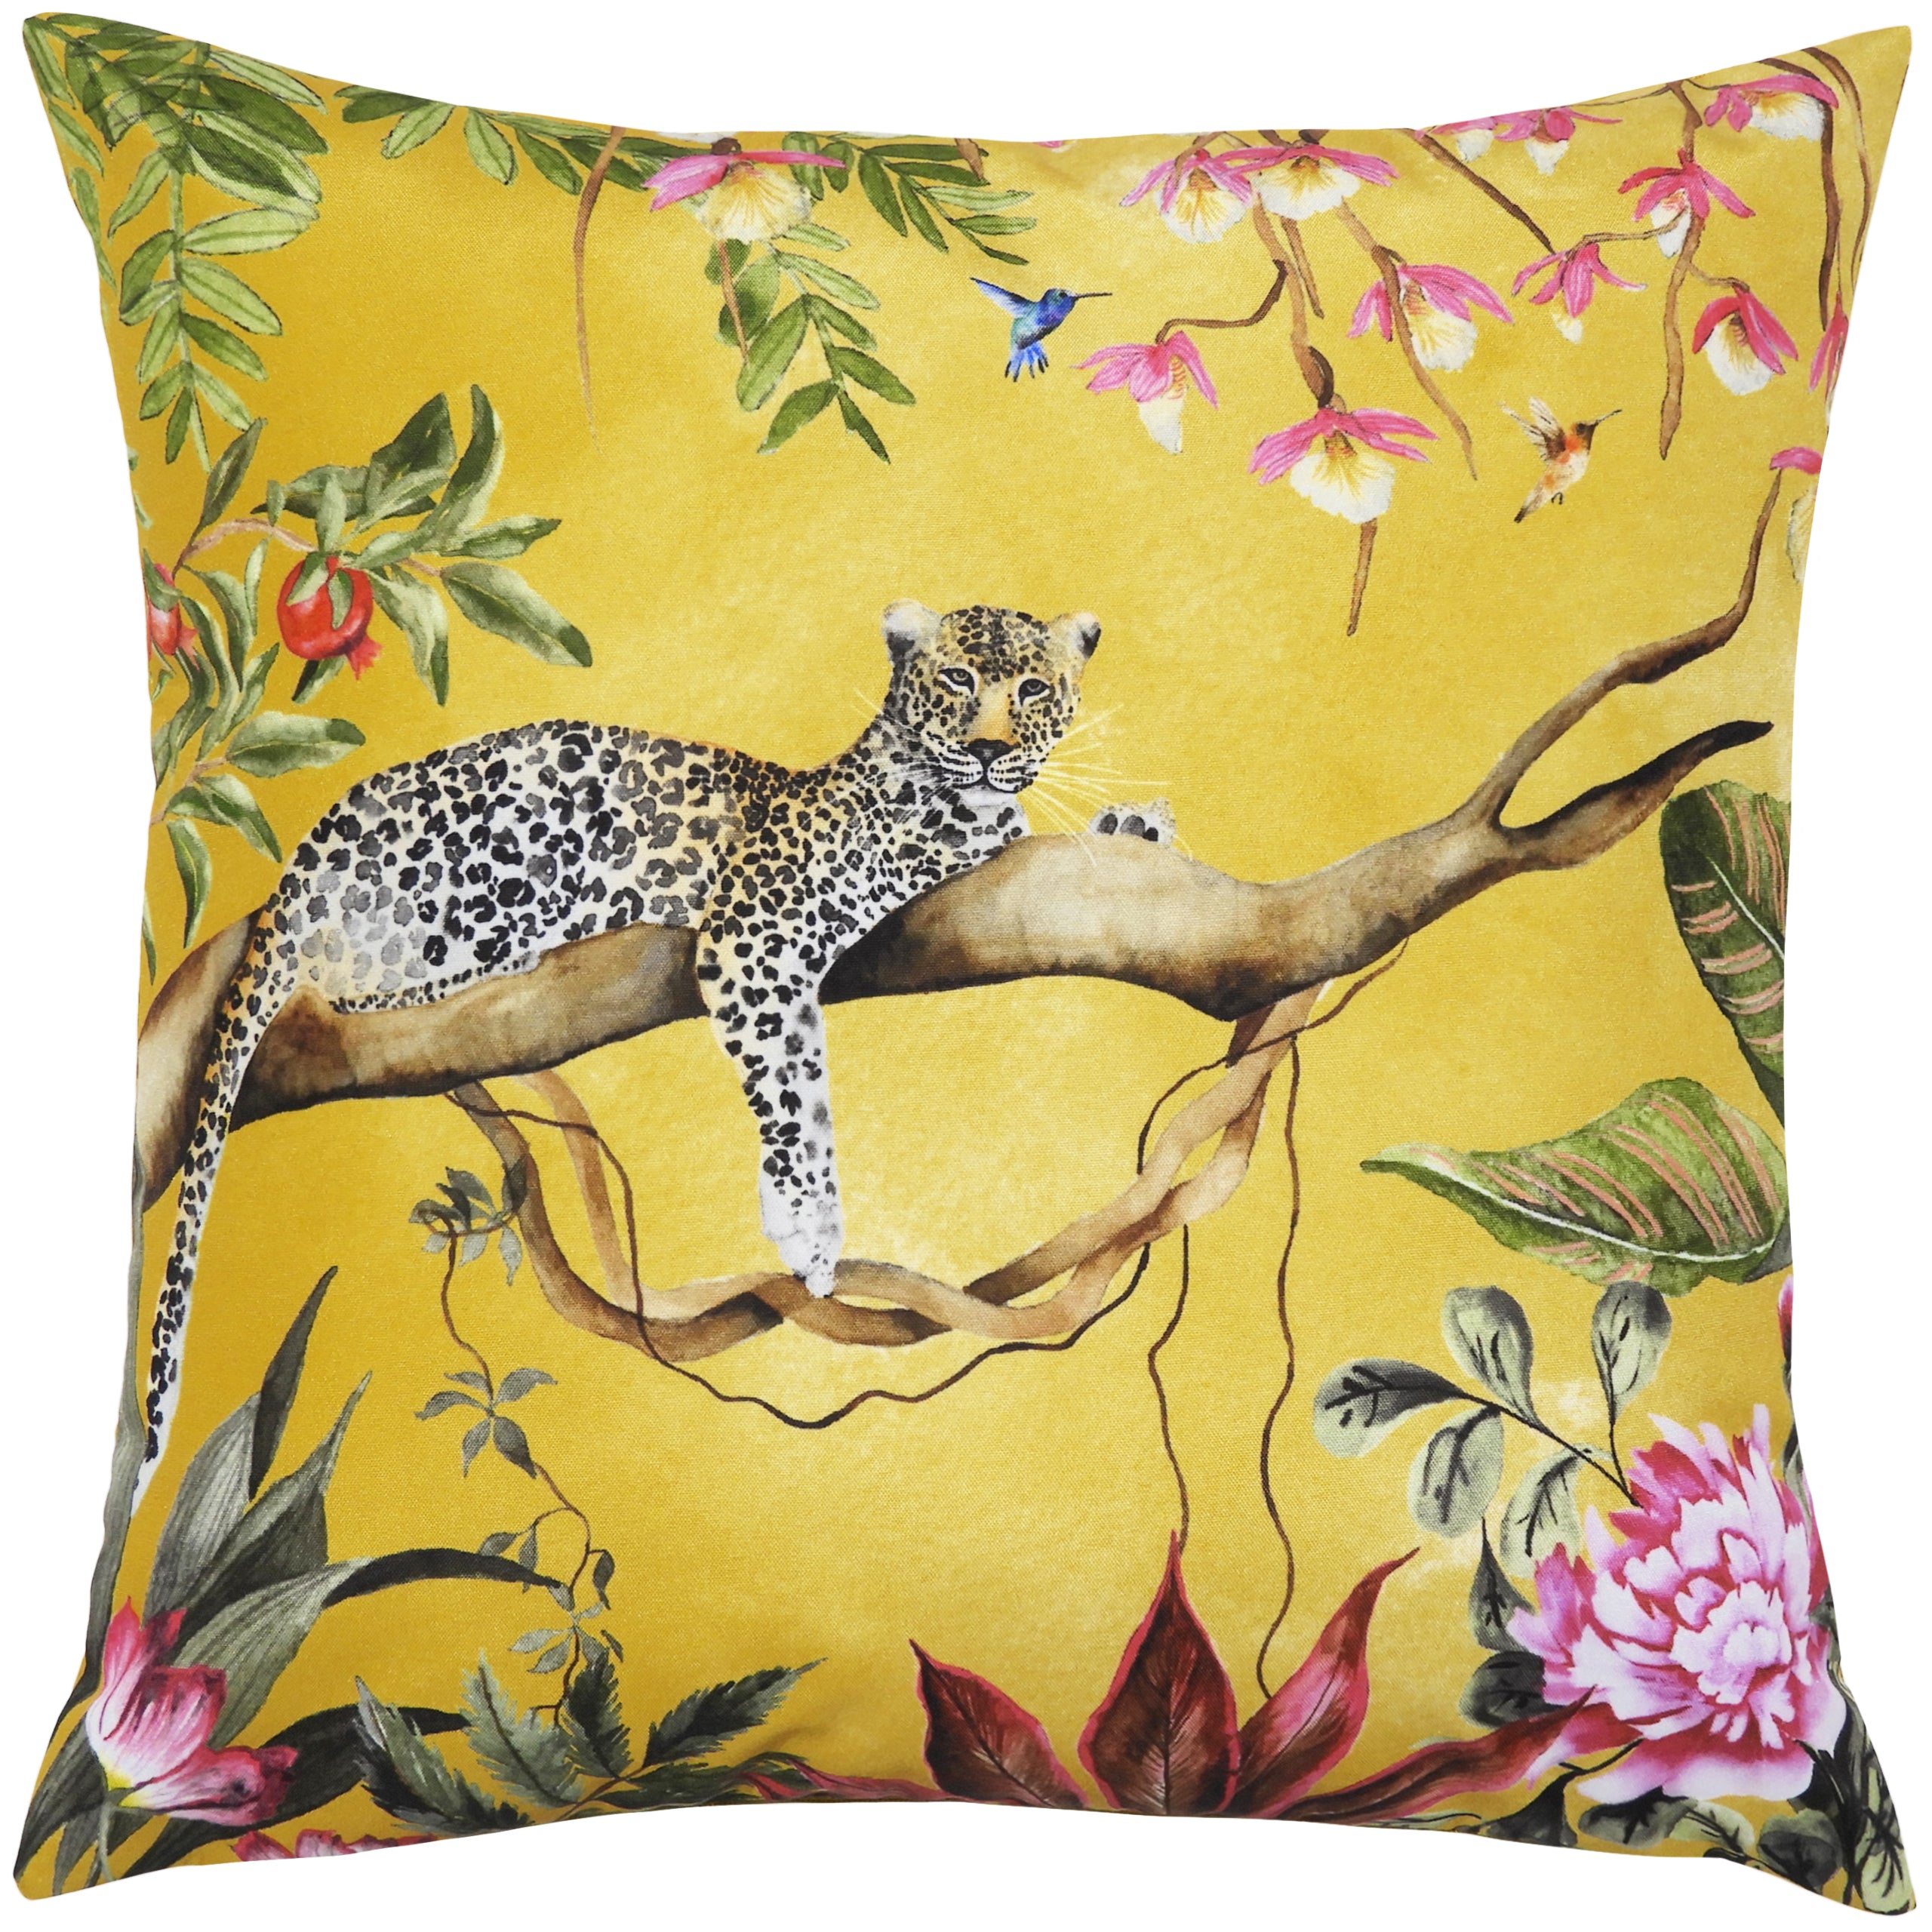 Leopard 43cmreversible Outdoor Polyester Cushion Roseland